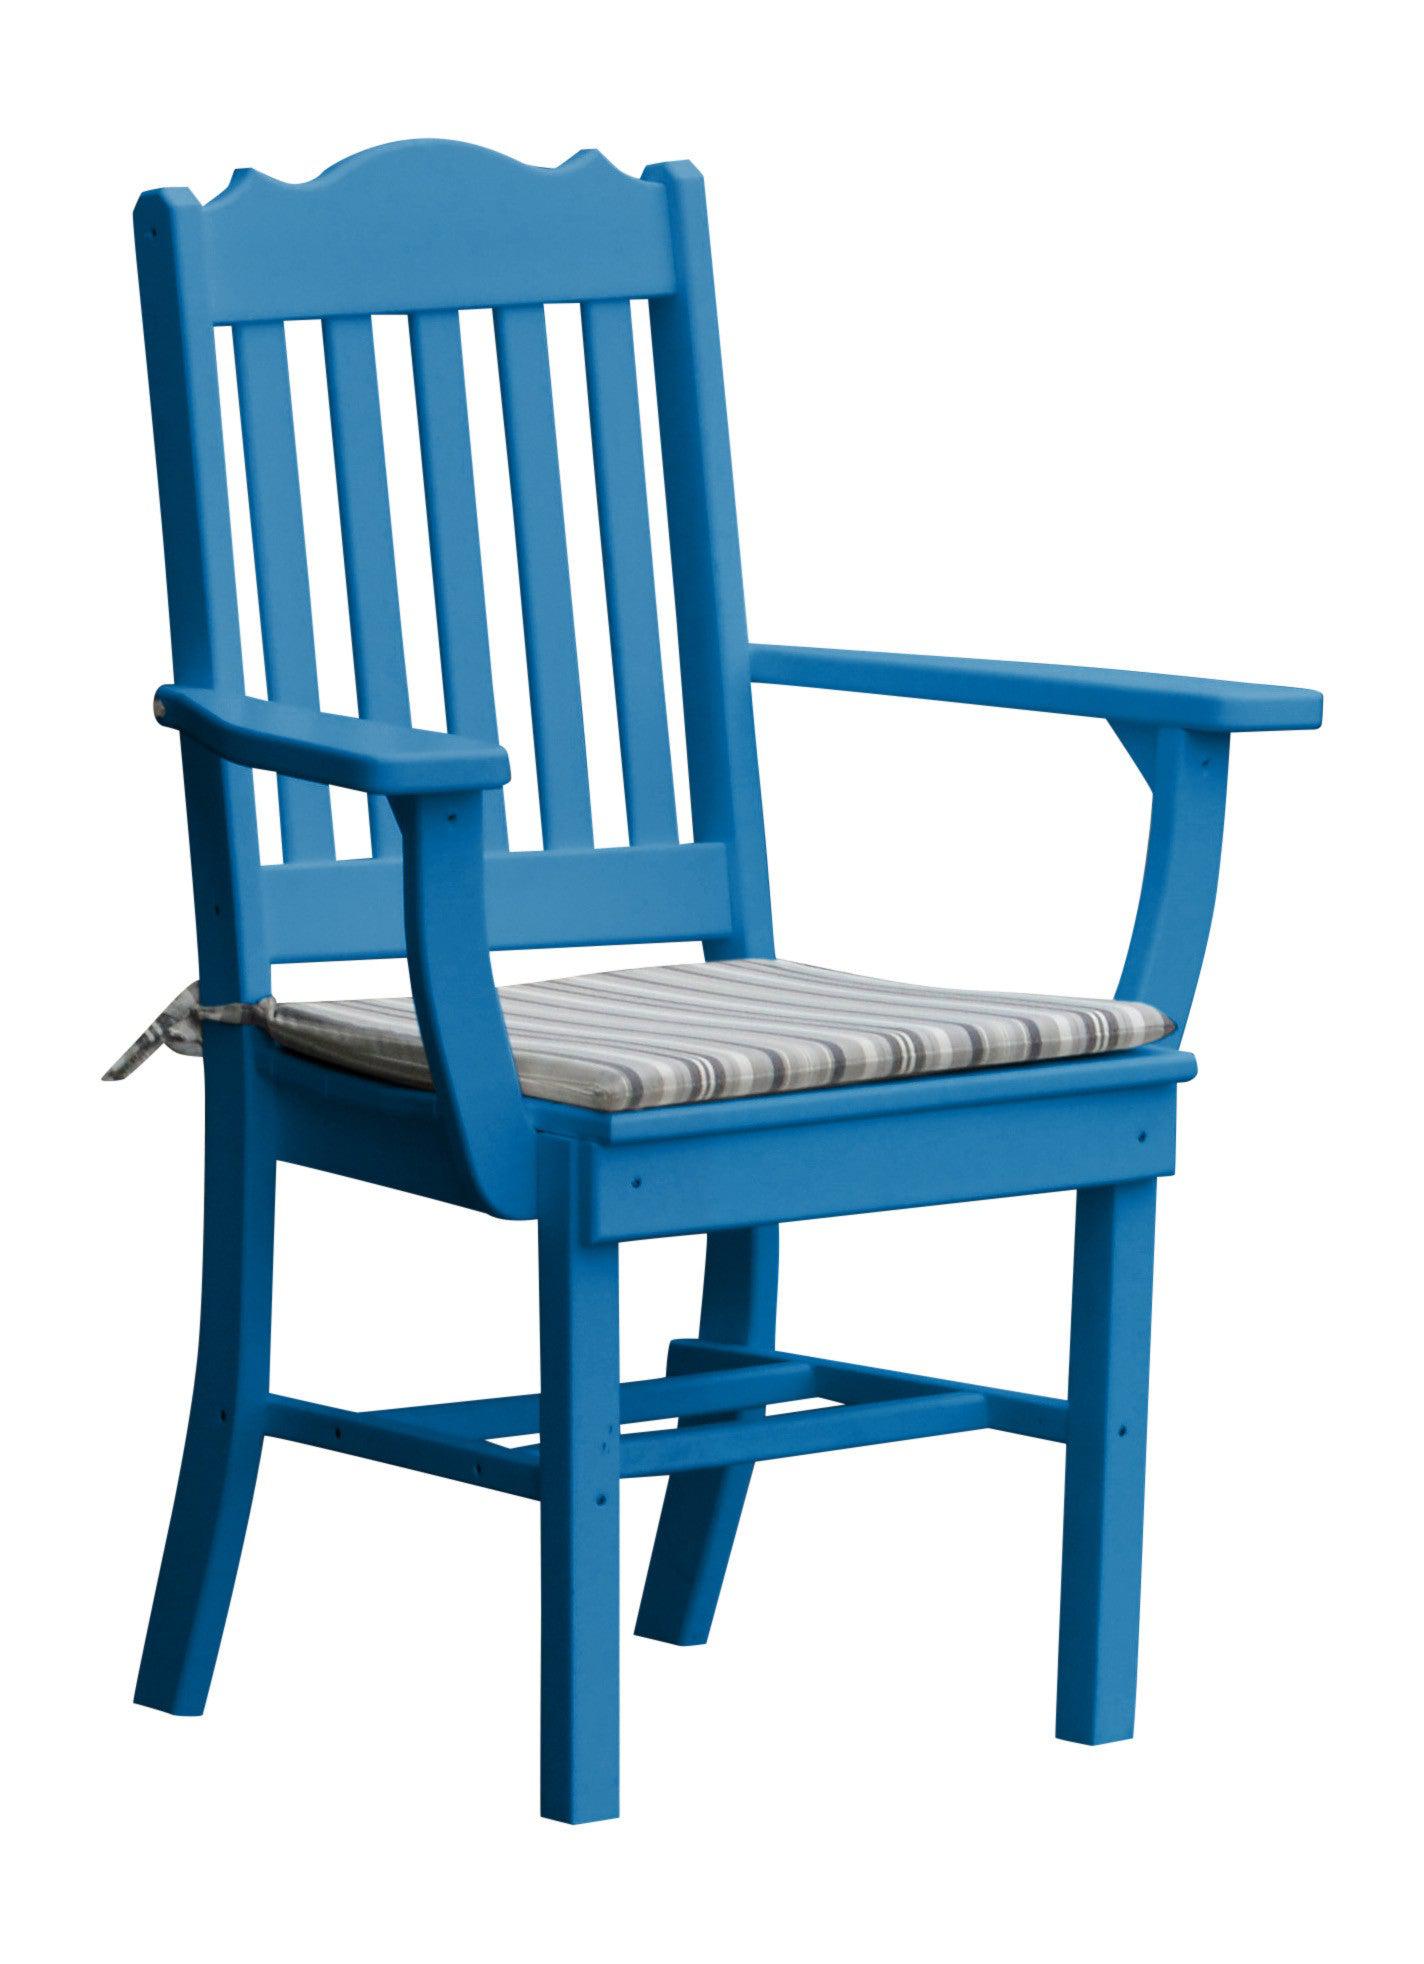 A&L Furniture Company Recycled Plastic Royal Dining Chair w/ Arms - Blue